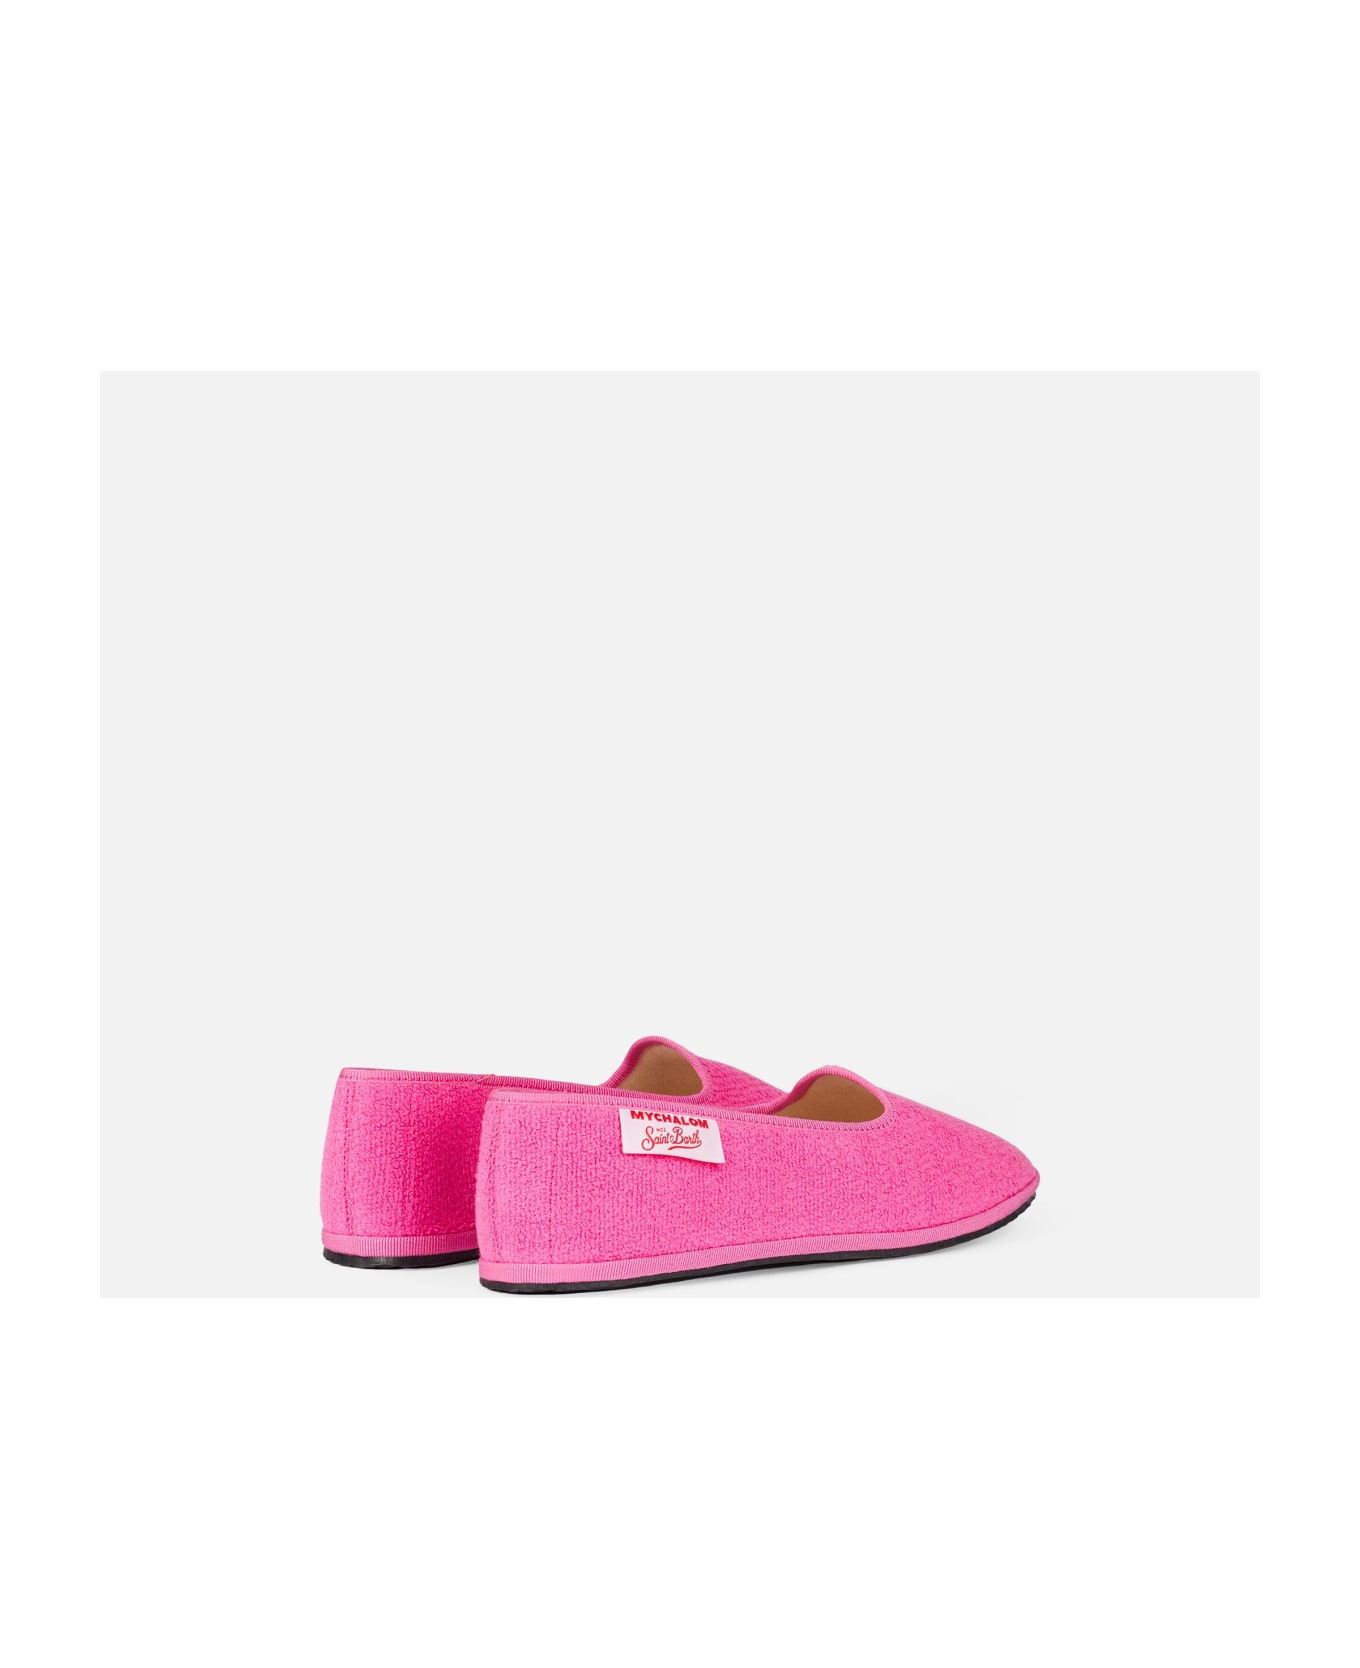 MC2 Saint Barth Girl Pink Terry Slipper Loafer | My Chalom Special Edition - PINK